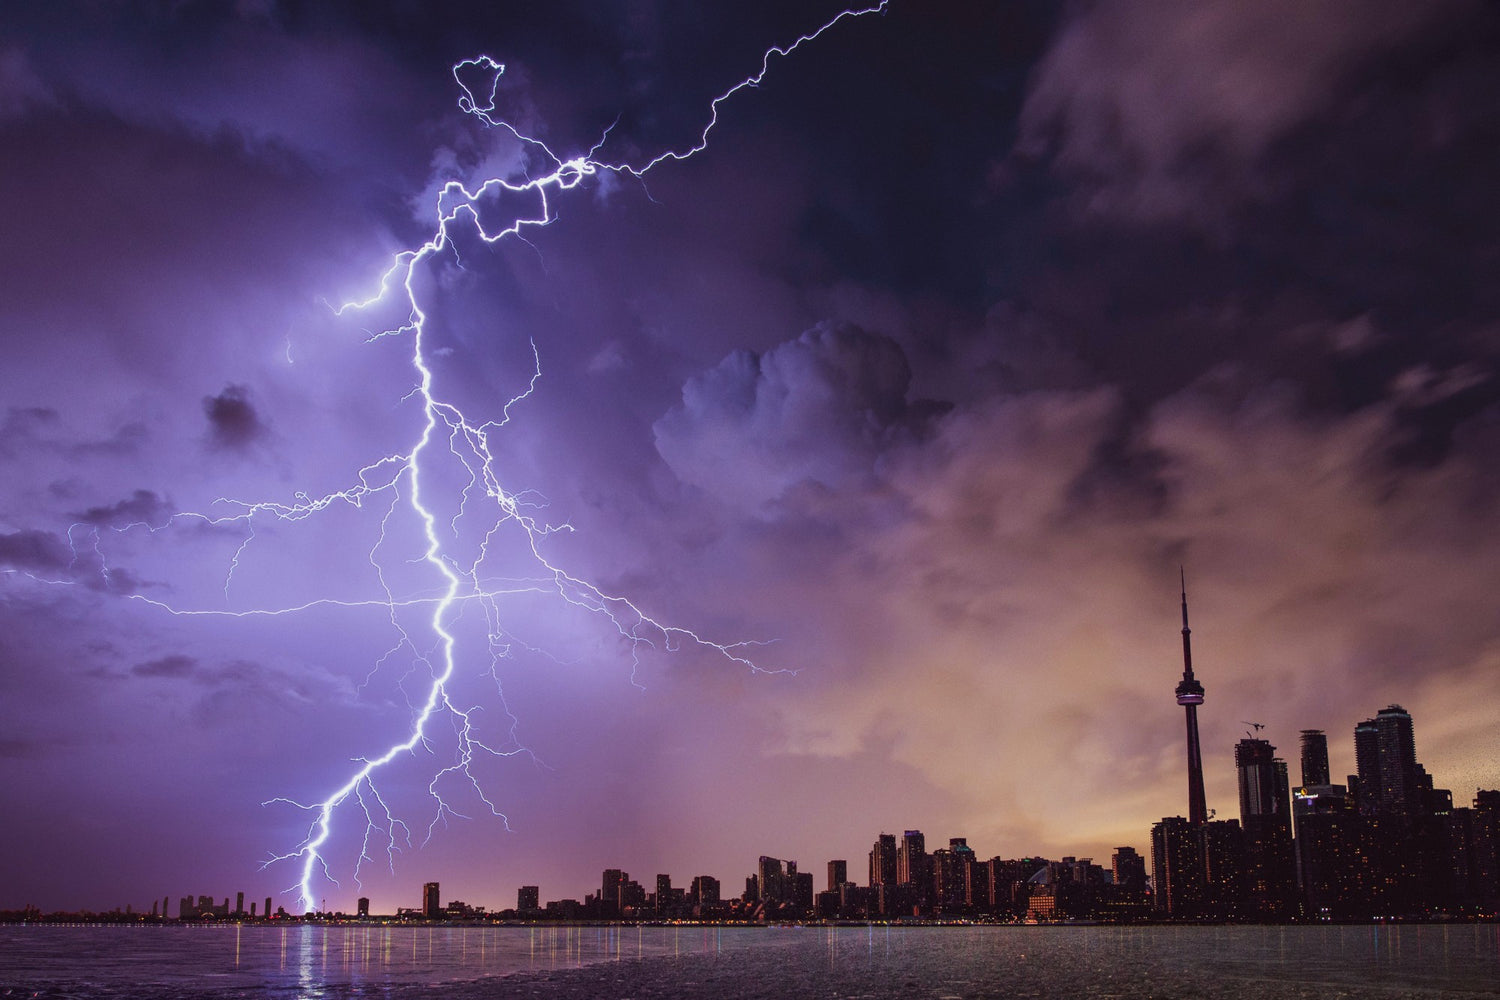 10 Top Tips for Photographing Lightning